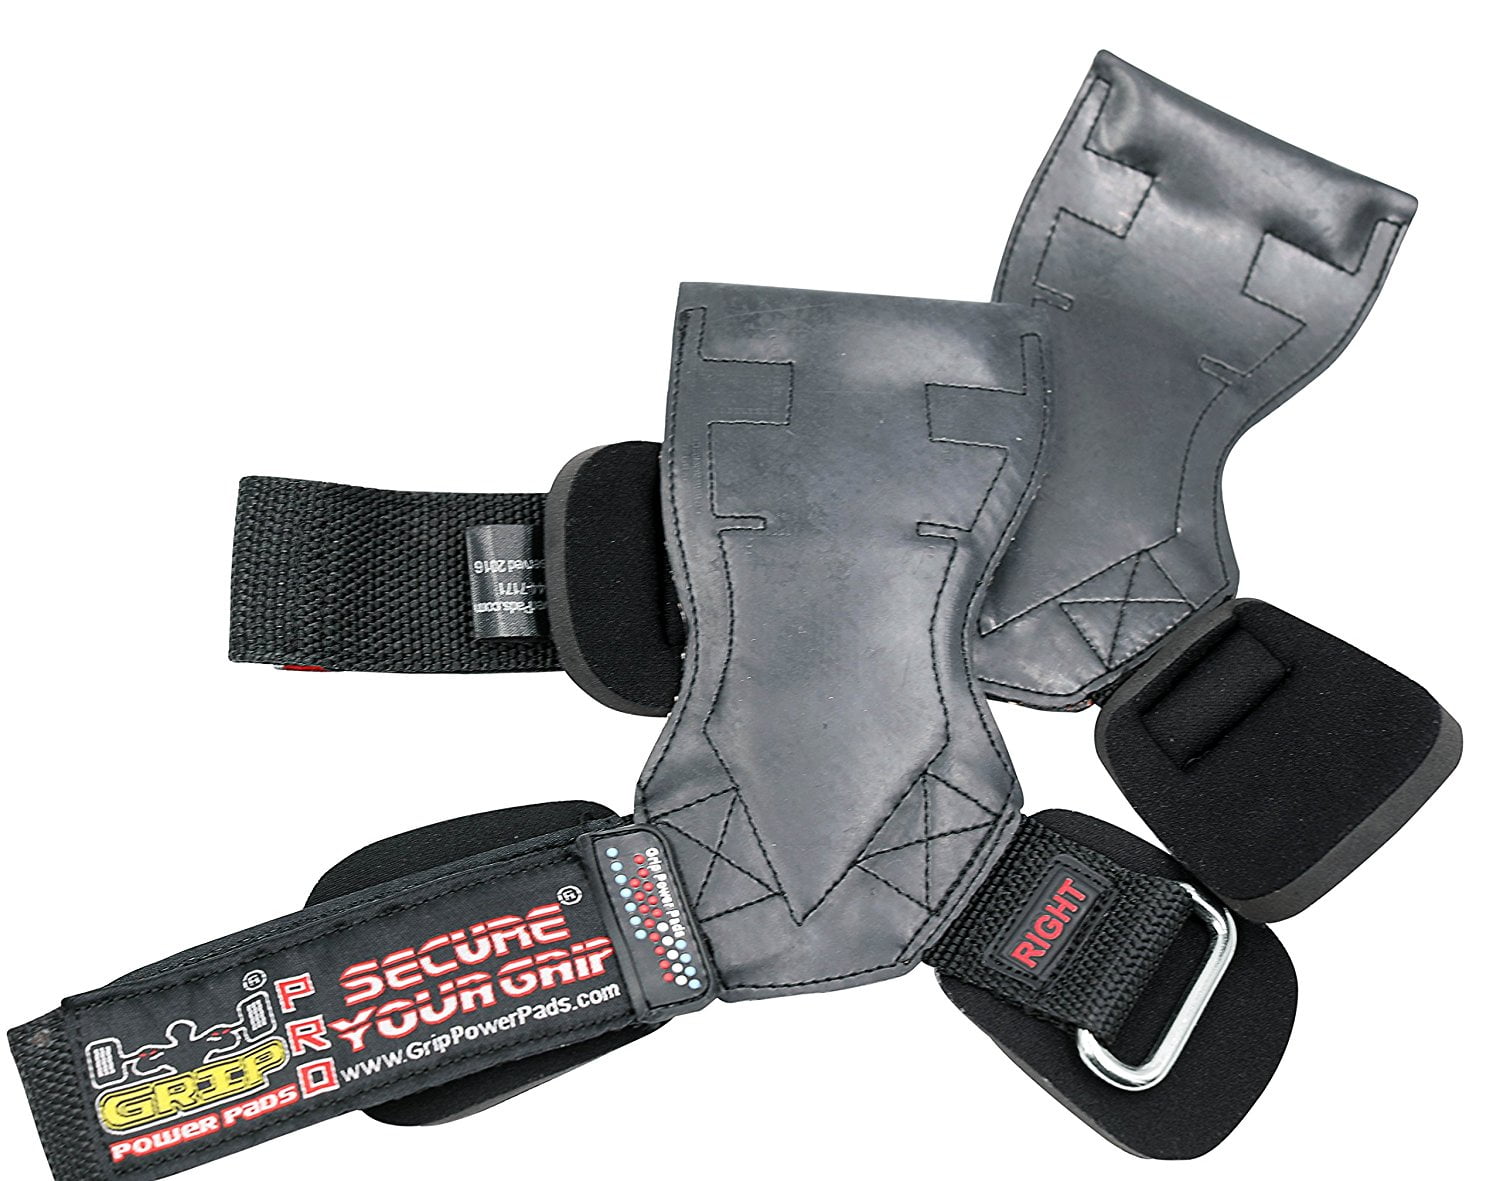 Prodigy Wrist Wraps Straps Weight Lifting Grips Padded and Adjustable Gloves Alternative to Power Hooks 